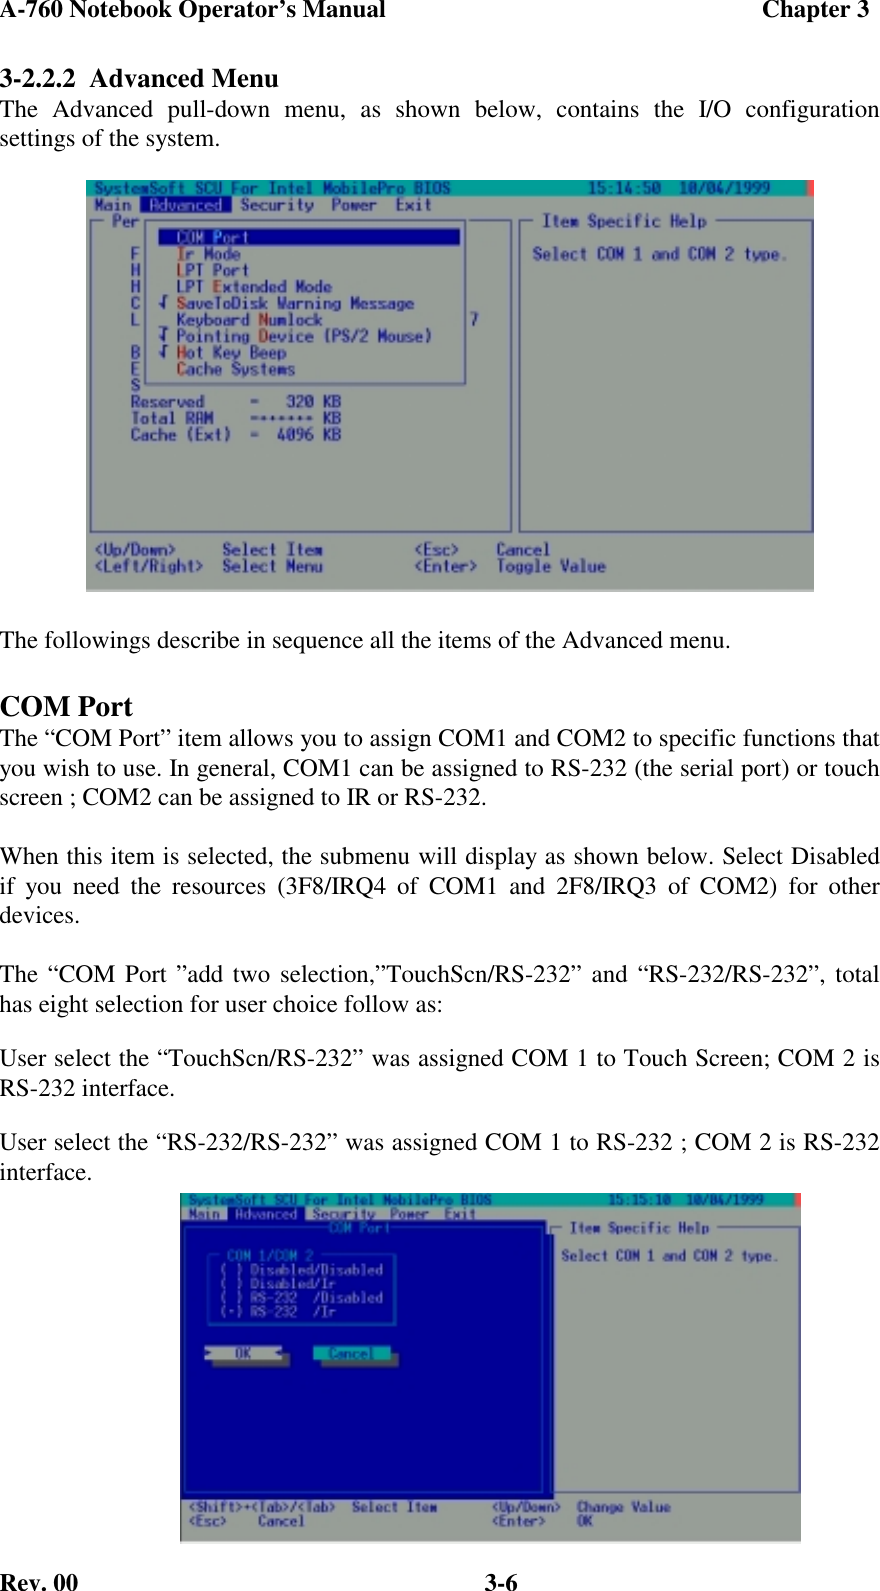 A-760 Notebook Operator’s Manual                                             Chapter 3Rev. 00 3-63-2.2.2  Advanced MenuThe Advanced pull-down menu, as shown below, contains the I/O configurationsettings of the system.The followings describe in sequence all the items of the Advanced menu.COM PortThe “COM Port” item allows you to assign COM1 and COM2 to specific functions thatyou wish to use. In general, COM1 can be assigned to RS-232 (the serial port) or touchscreen ; COM2 can be assigned to IR or RS-232.When this item is selected, the submenu will display as shown below. Select Disabledif you need the resources (3F8/IRQ4 of COM1 and 2F8/IRQ3 of COM2) for otherdevices.The “COM Port ”add two selection,”TouchScn/RS-232” and “RS-232/RS-232”, totalhas eight selection for user choice follow as:User select the “TouchScn/RS-232” was assigned COM 1 to Touch Screen; COM 2 isRS-232 interface.User select the “RS-232/RS-232” was assigned COM 1 to RS-232 ; COM 2 is RS-232interface.